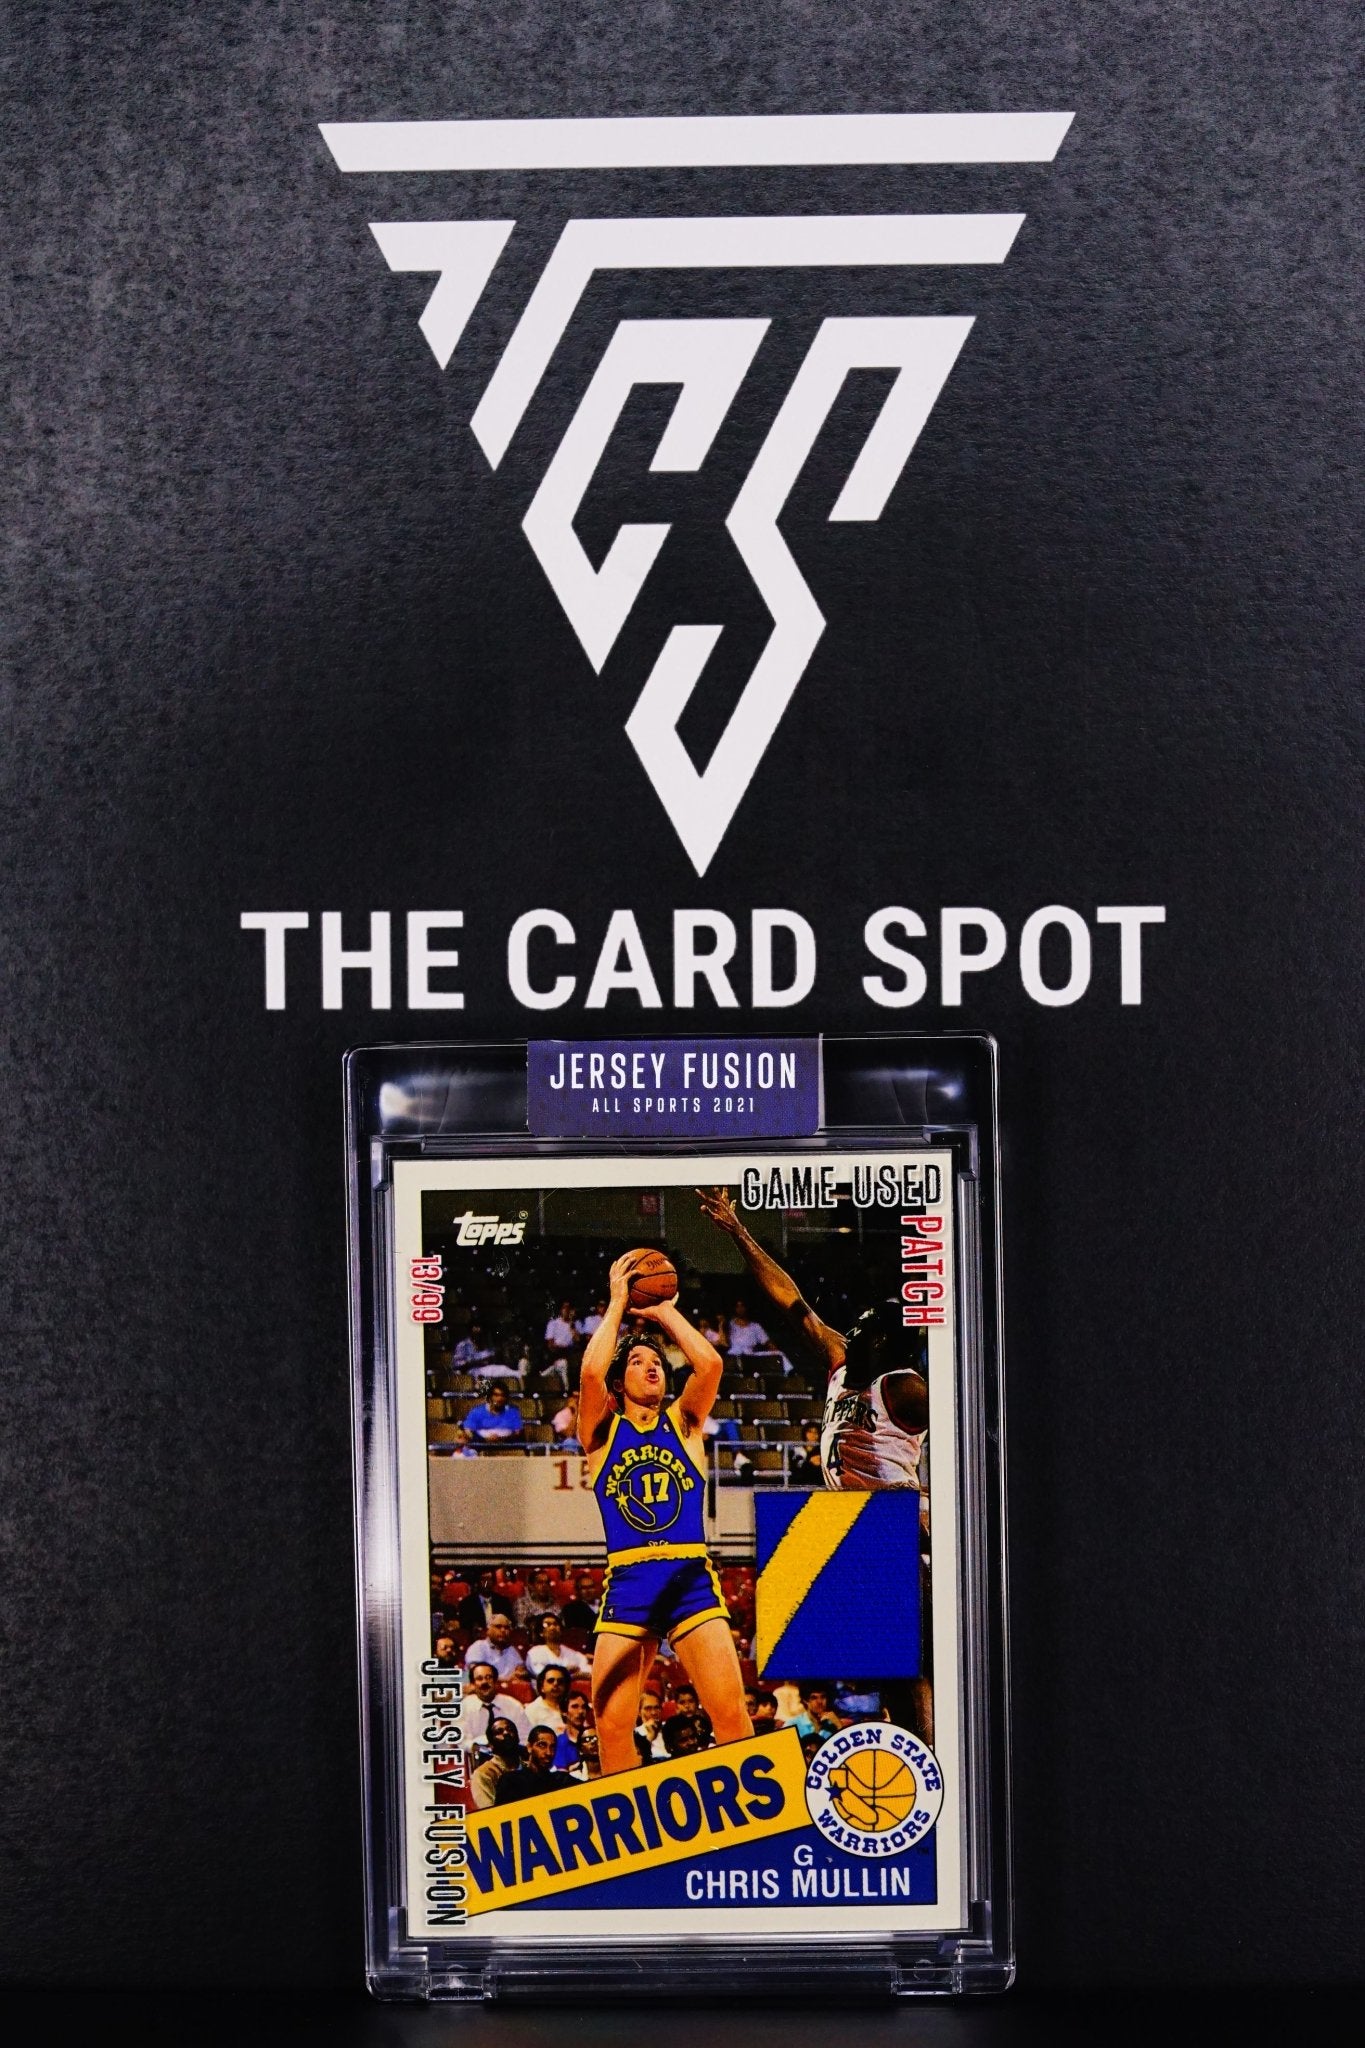 Basketball Card: Chris Mullin Game used patch 13/99 Limited edition. - THE CARD SPOT PTY LTD.Sports CardJersey Fusion